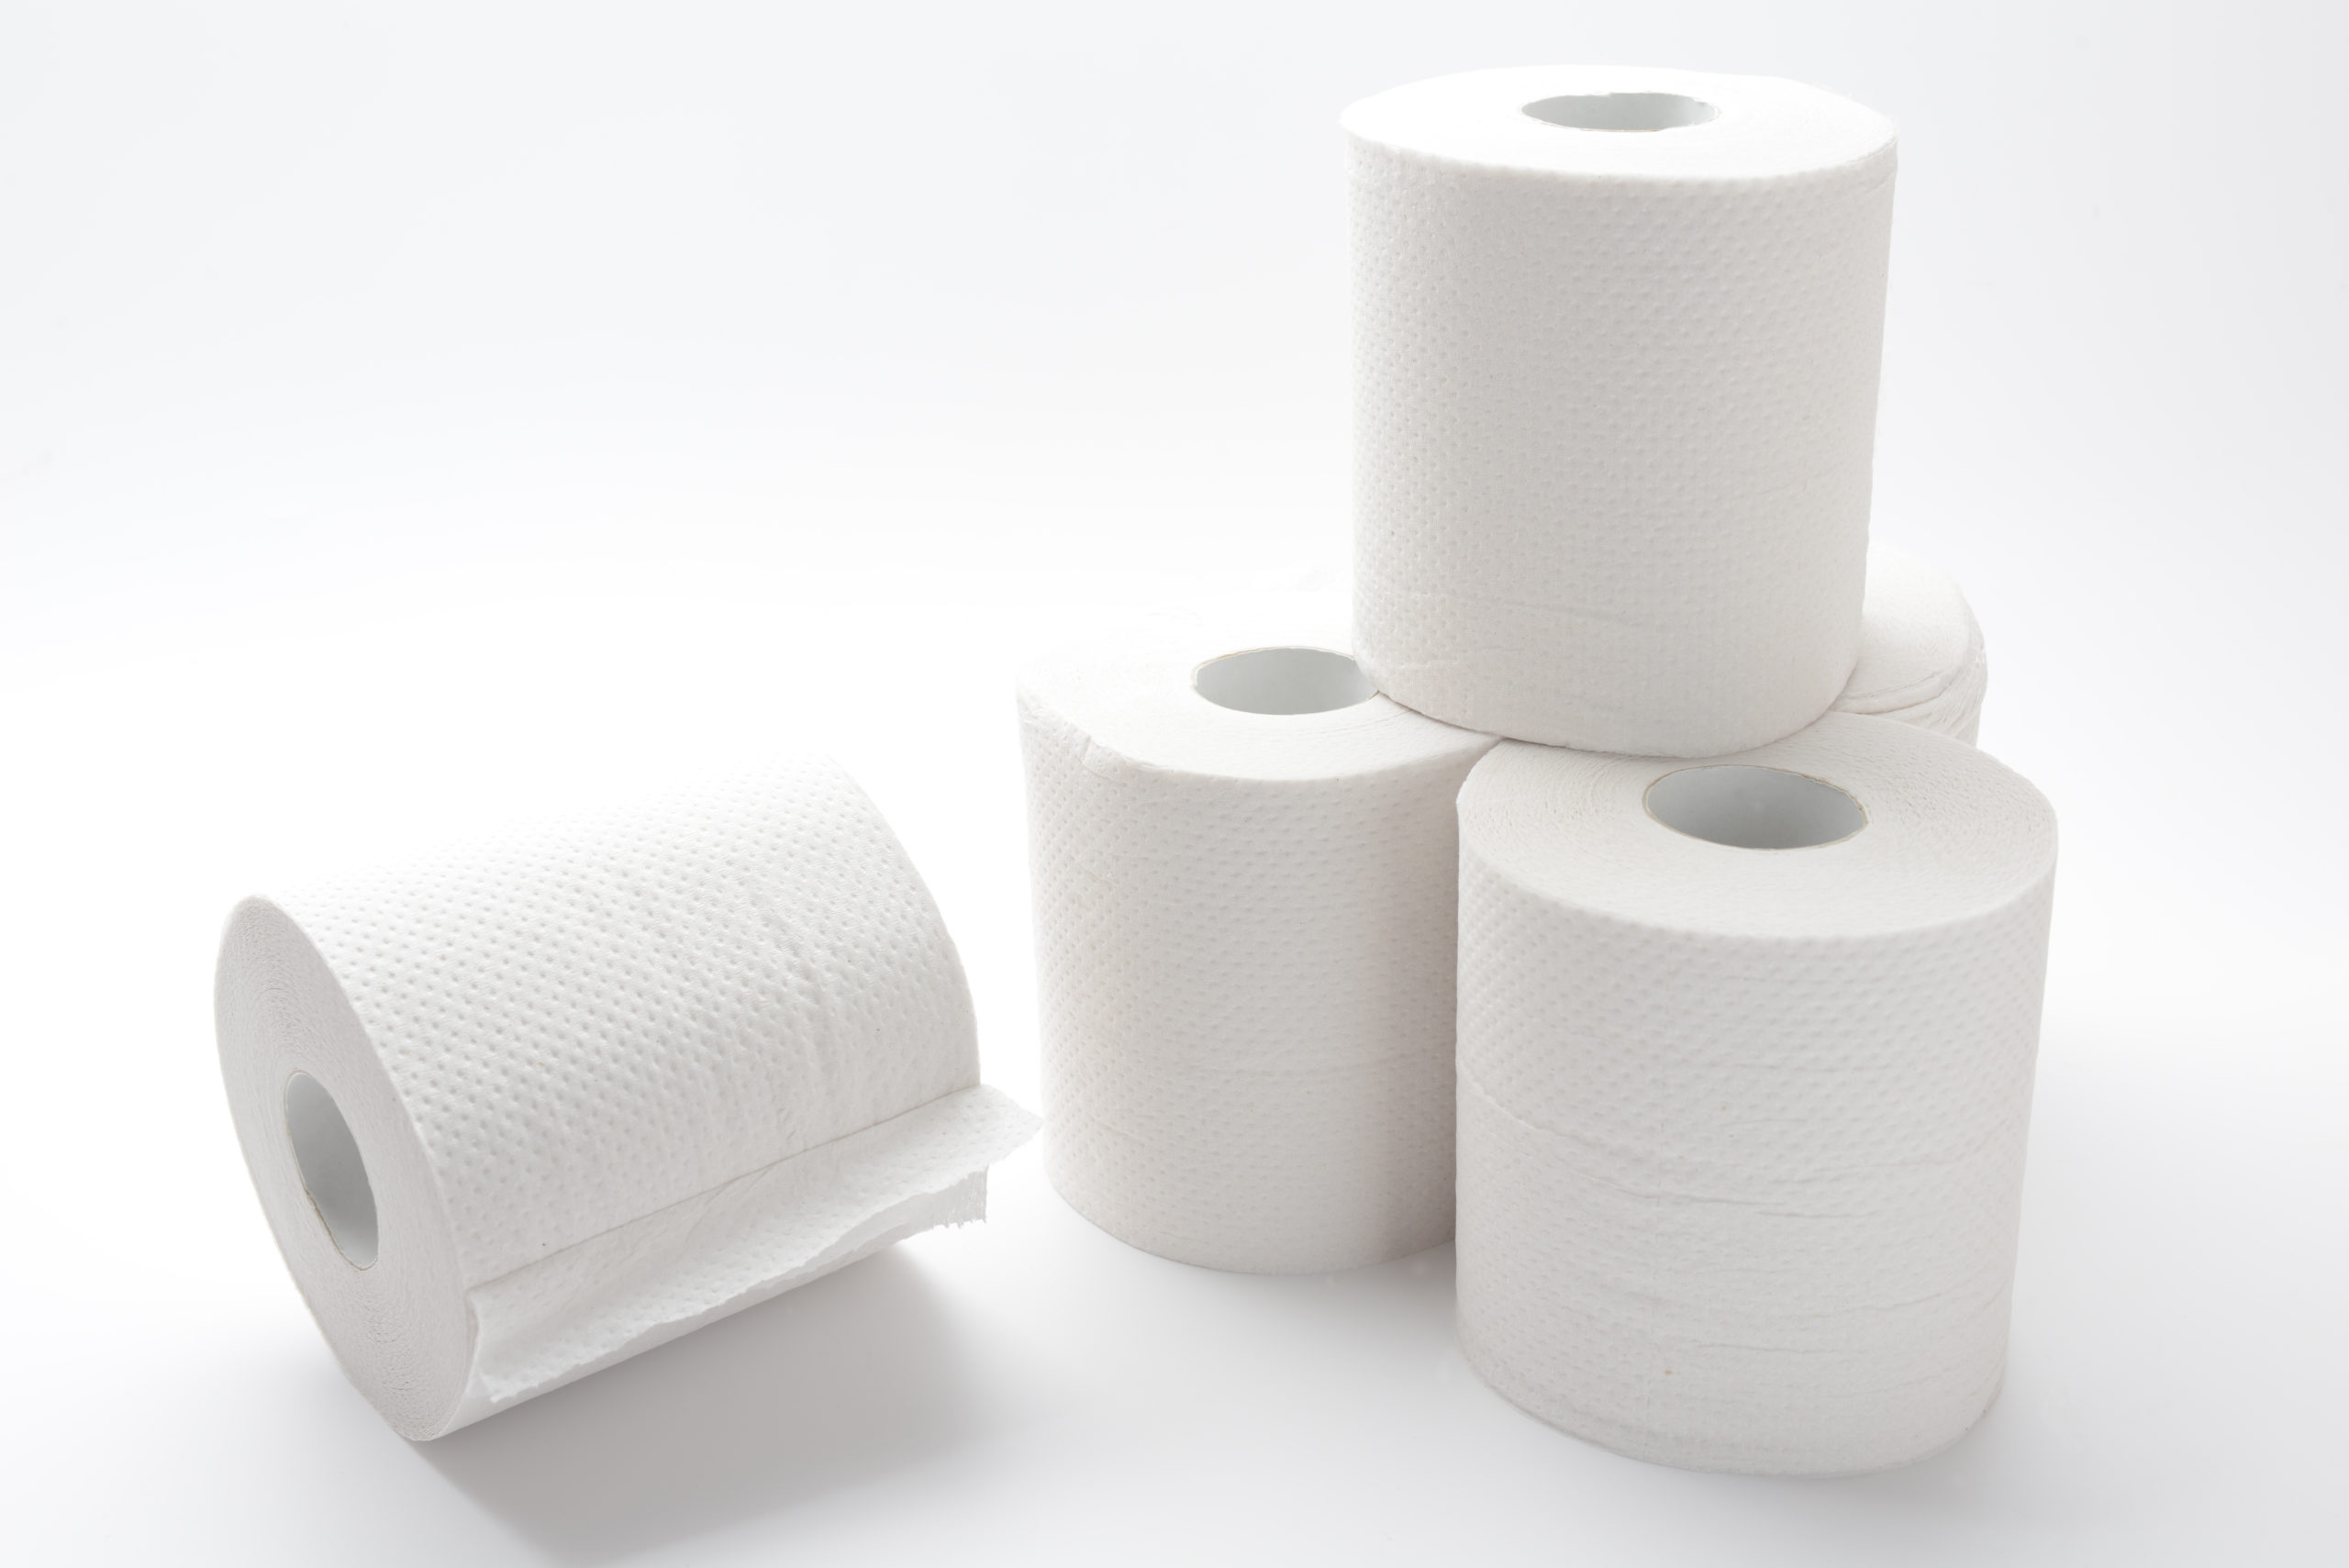 Family gives away toilet paper as consumers hoard